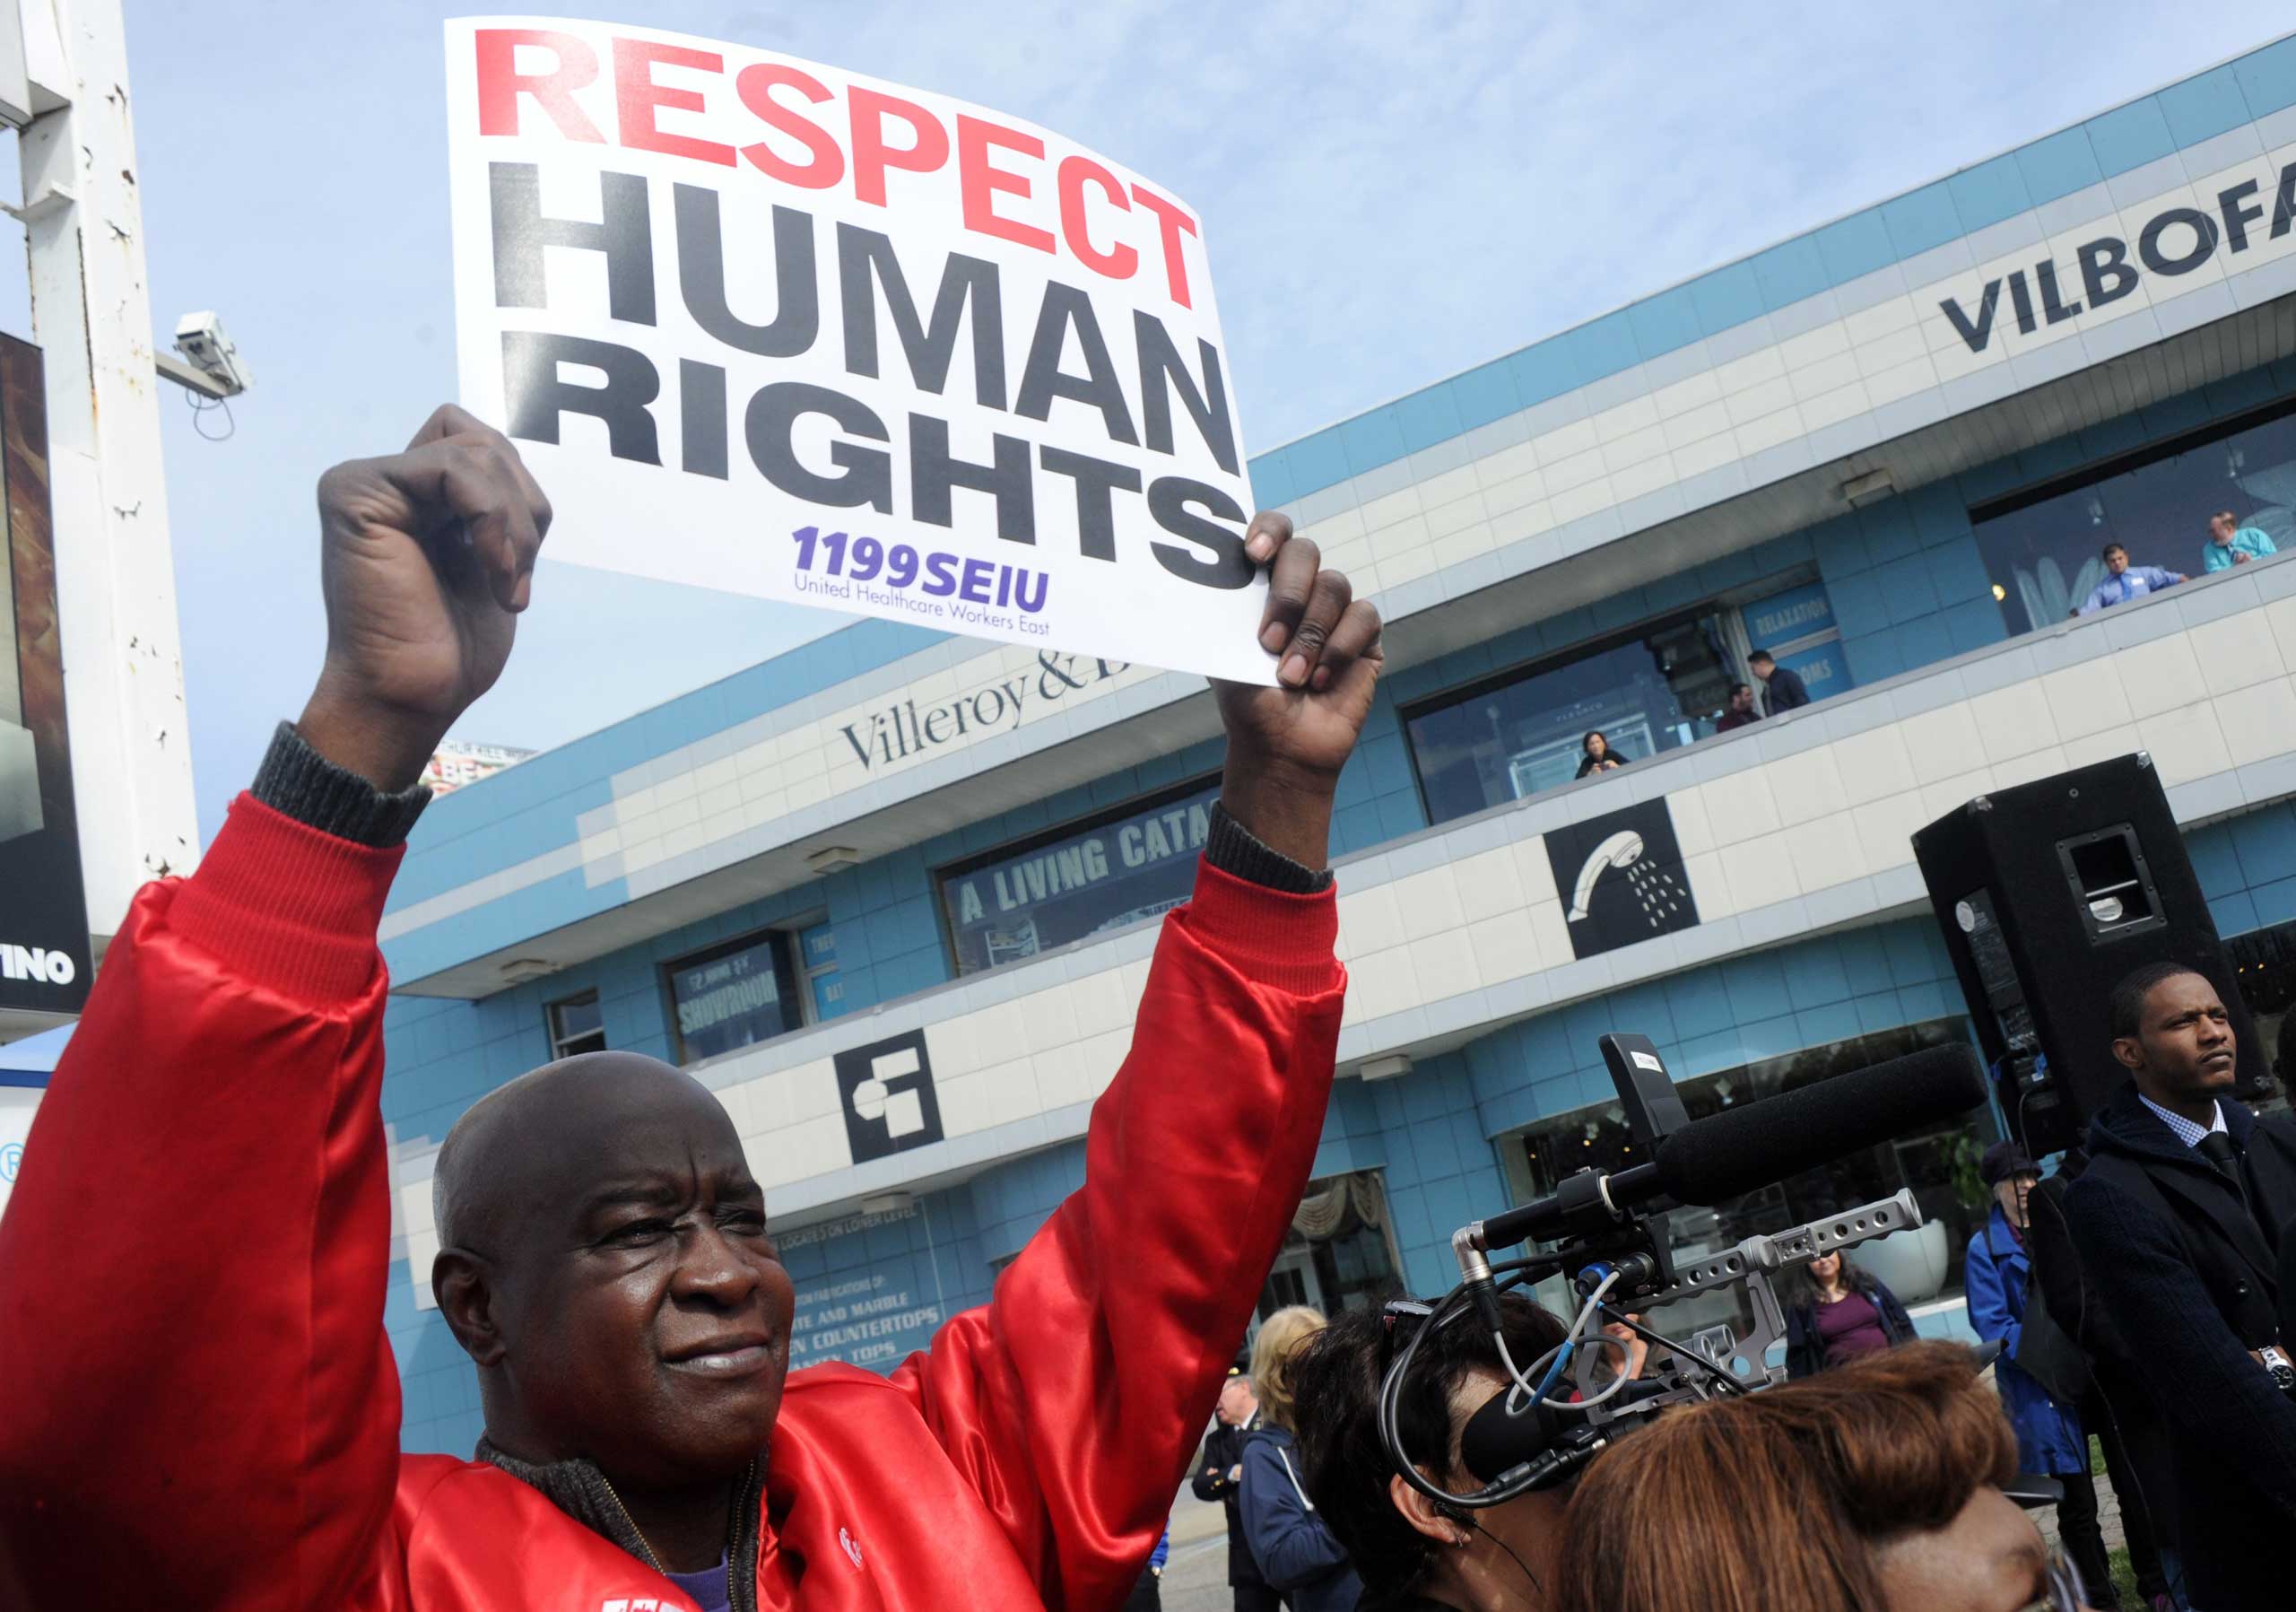 March2Justice demonstration calling for criminal justice reform, Staten Island, New York, America - 13 Apr 2015